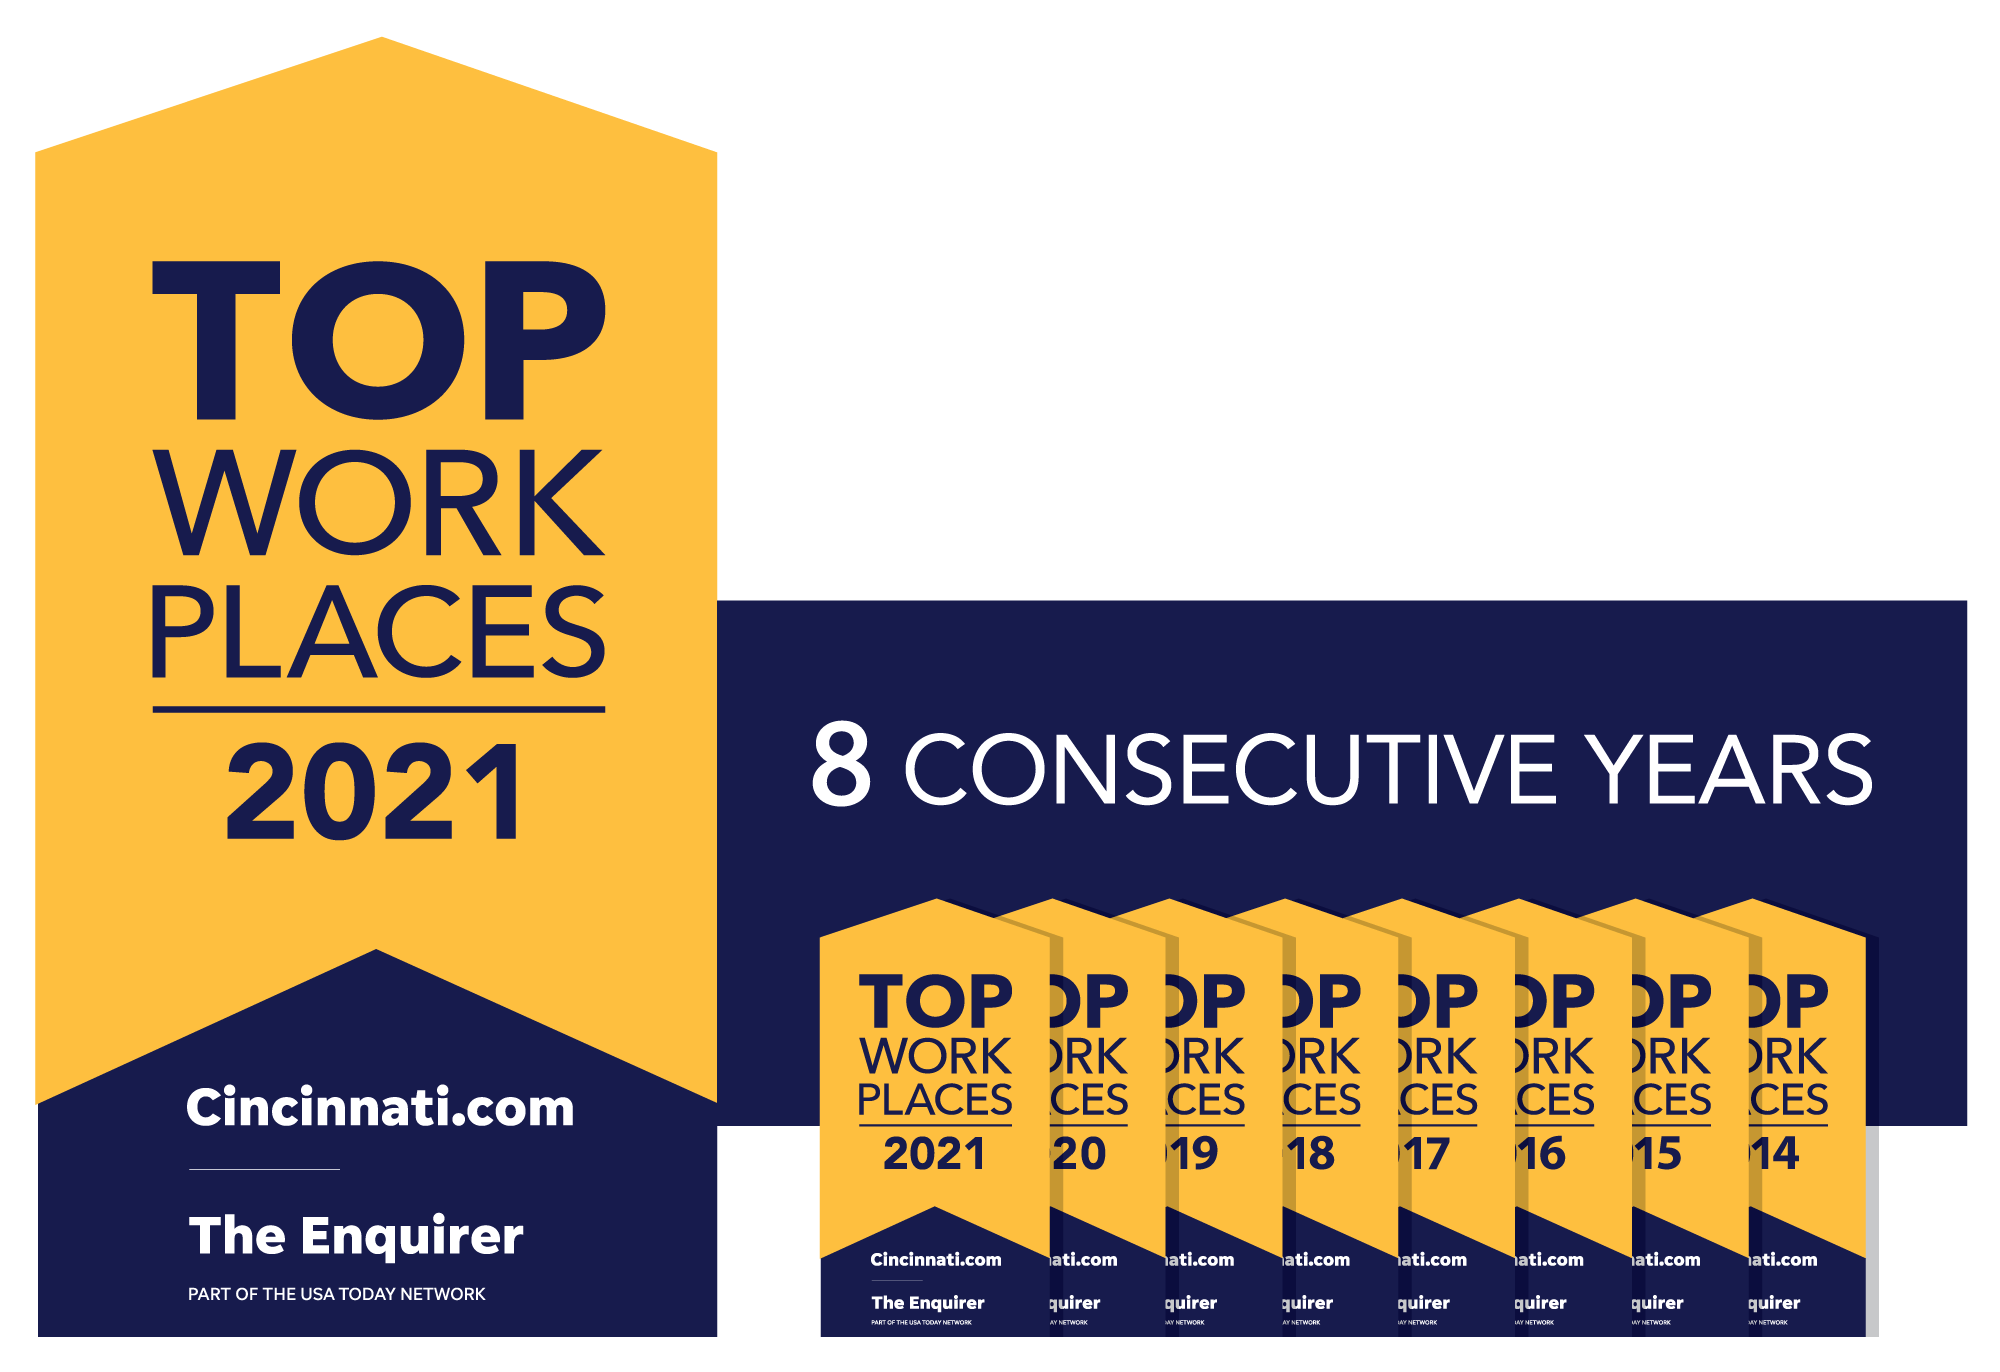 Top Workplaces Award 8 Consecutive Years